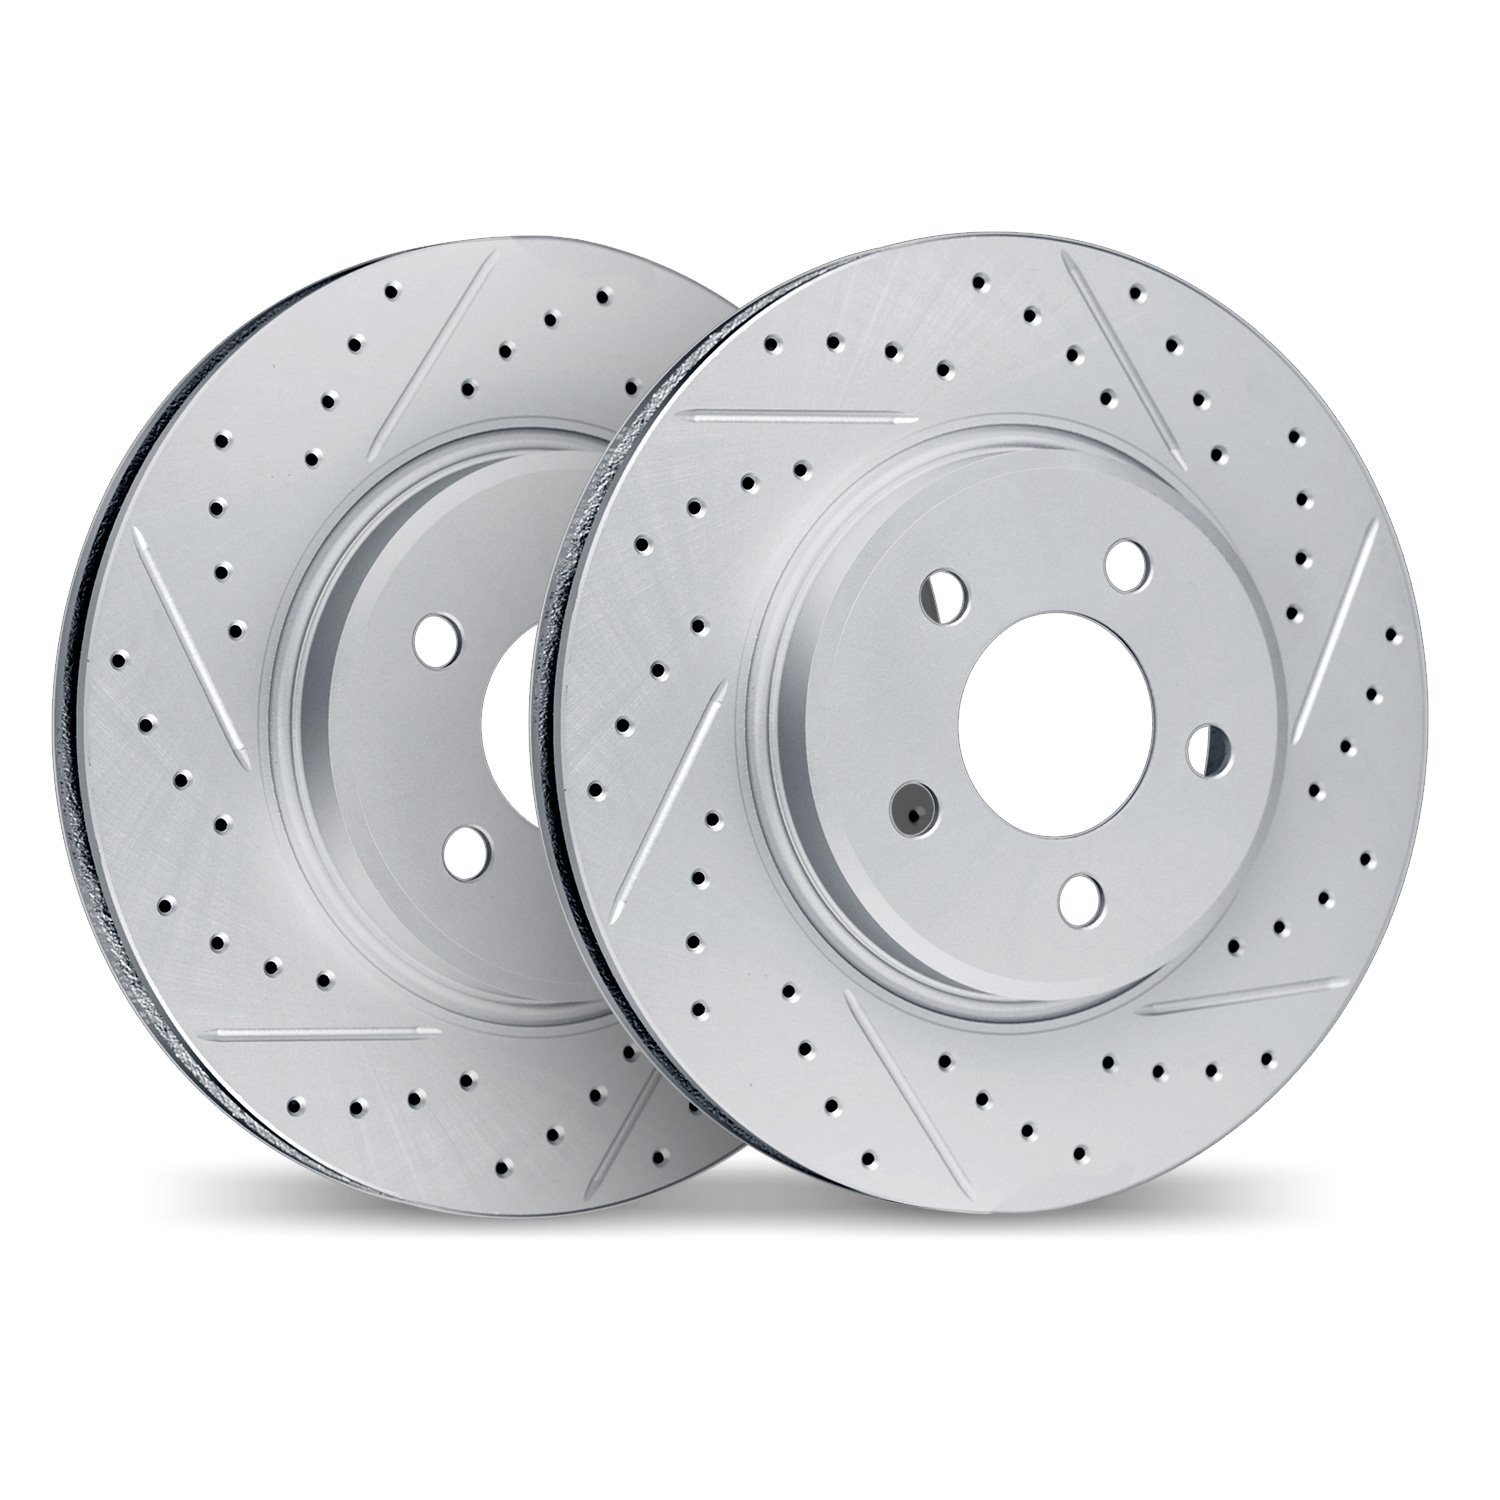 2002-46001 Geoperformance Drilled/Slotted Brake Rotors, 2014-2019 GM, Position: Front